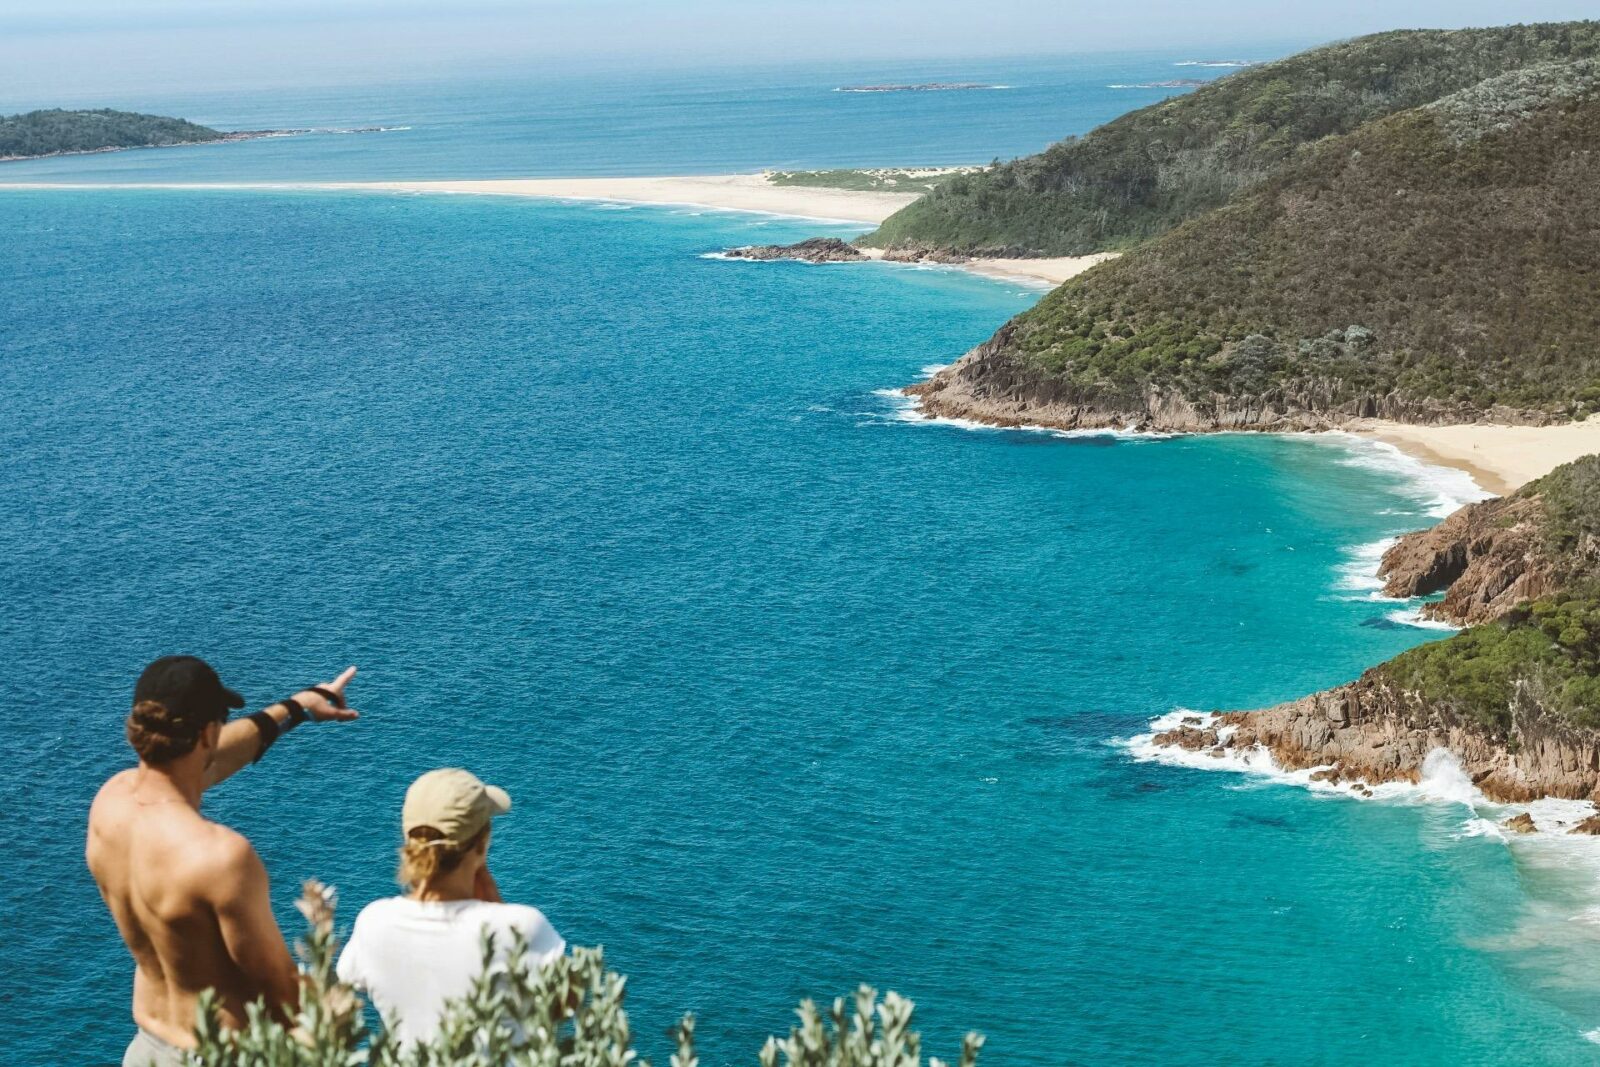 View at the top of Tomaree